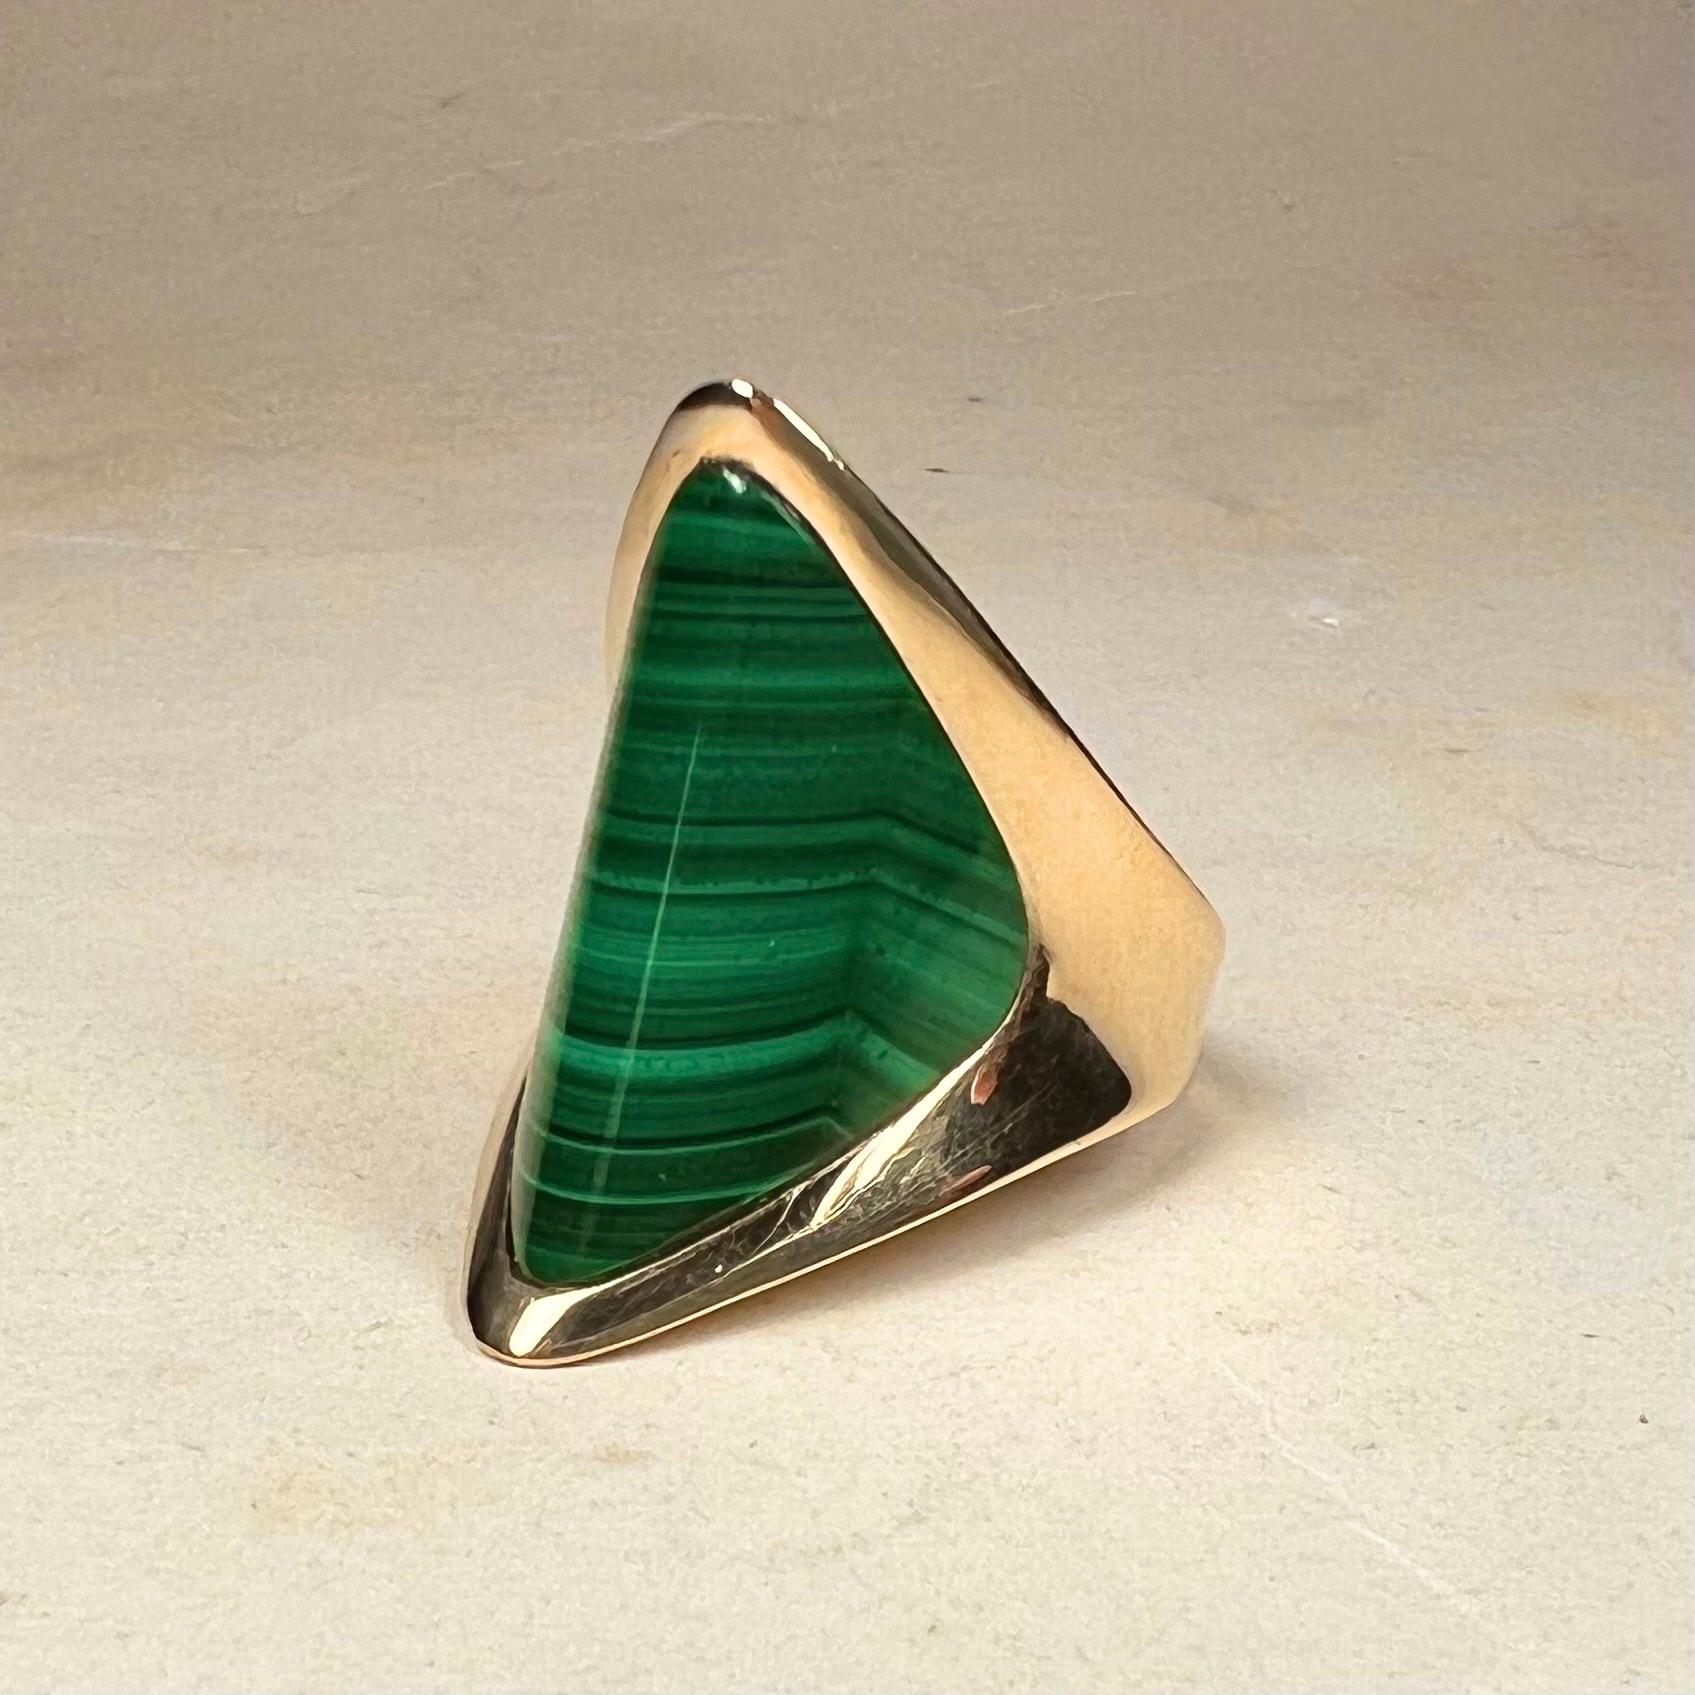 Piaget 18 Karat Yellow Gold and Malachite Cocktail Ring, circa 1970s For Sale 3